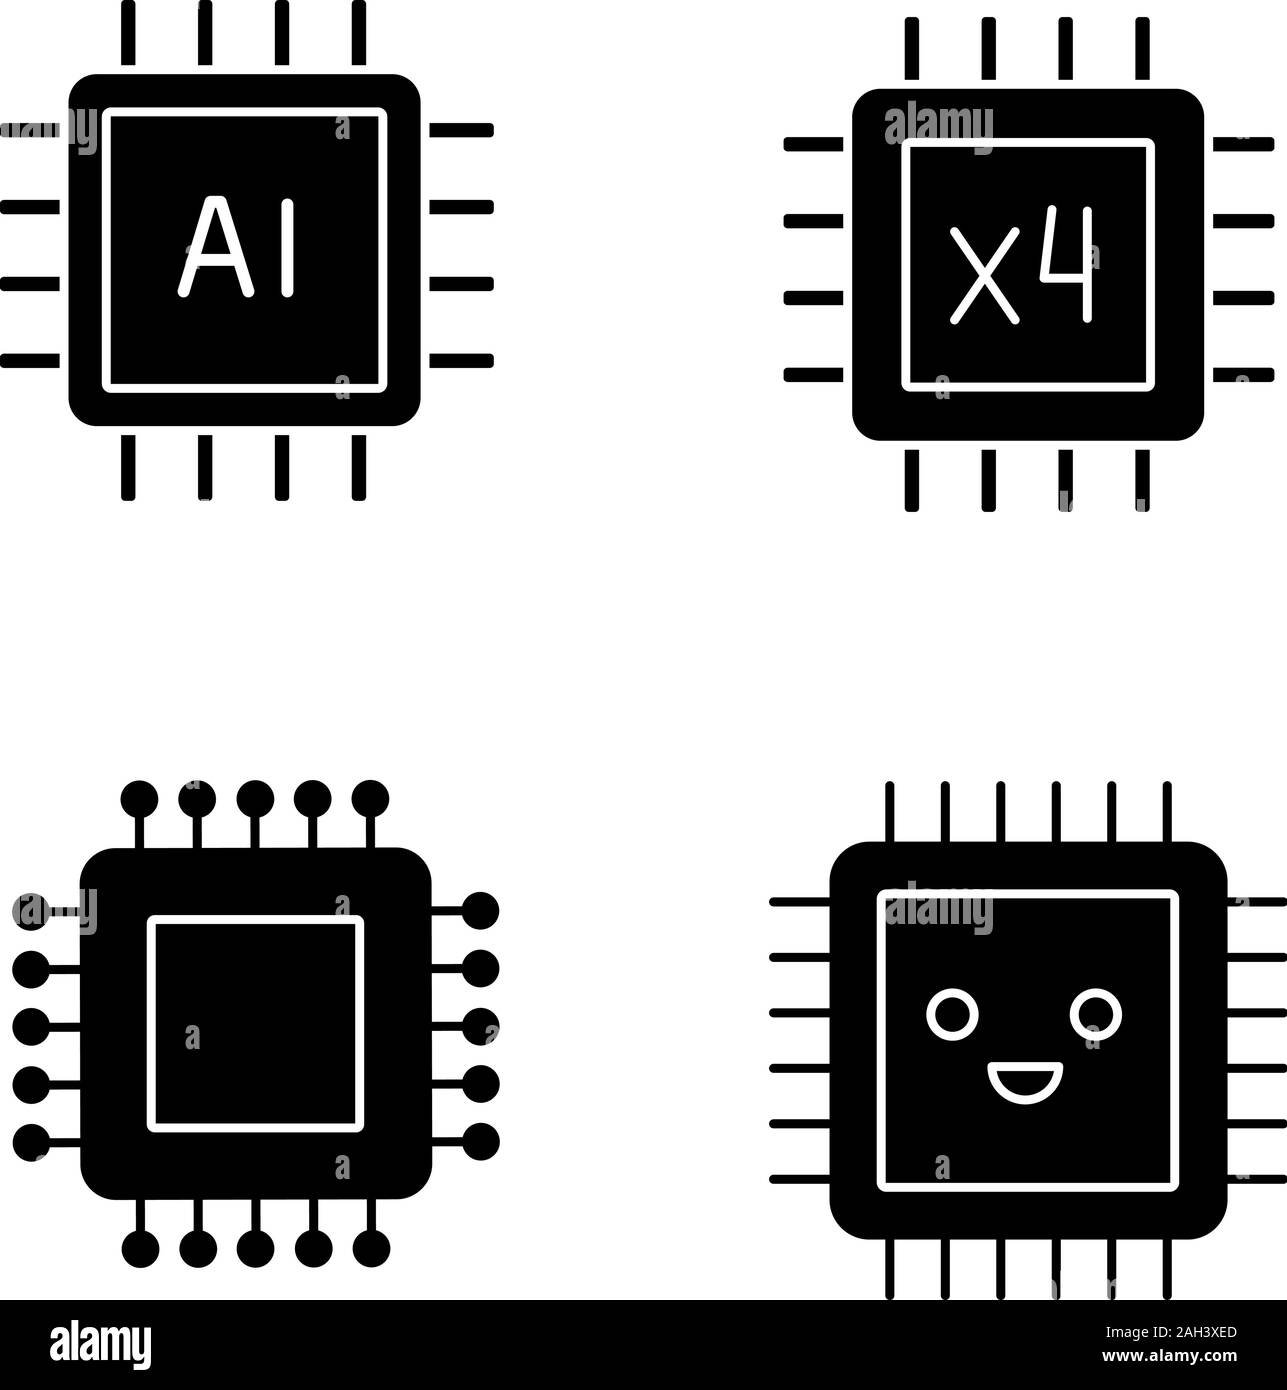 Processors glyph icons set. Chip, integrated circuit for ai system, smiling microprocessor, quad core processor. Silhouette symbols. Vector isolated i Stock Vector